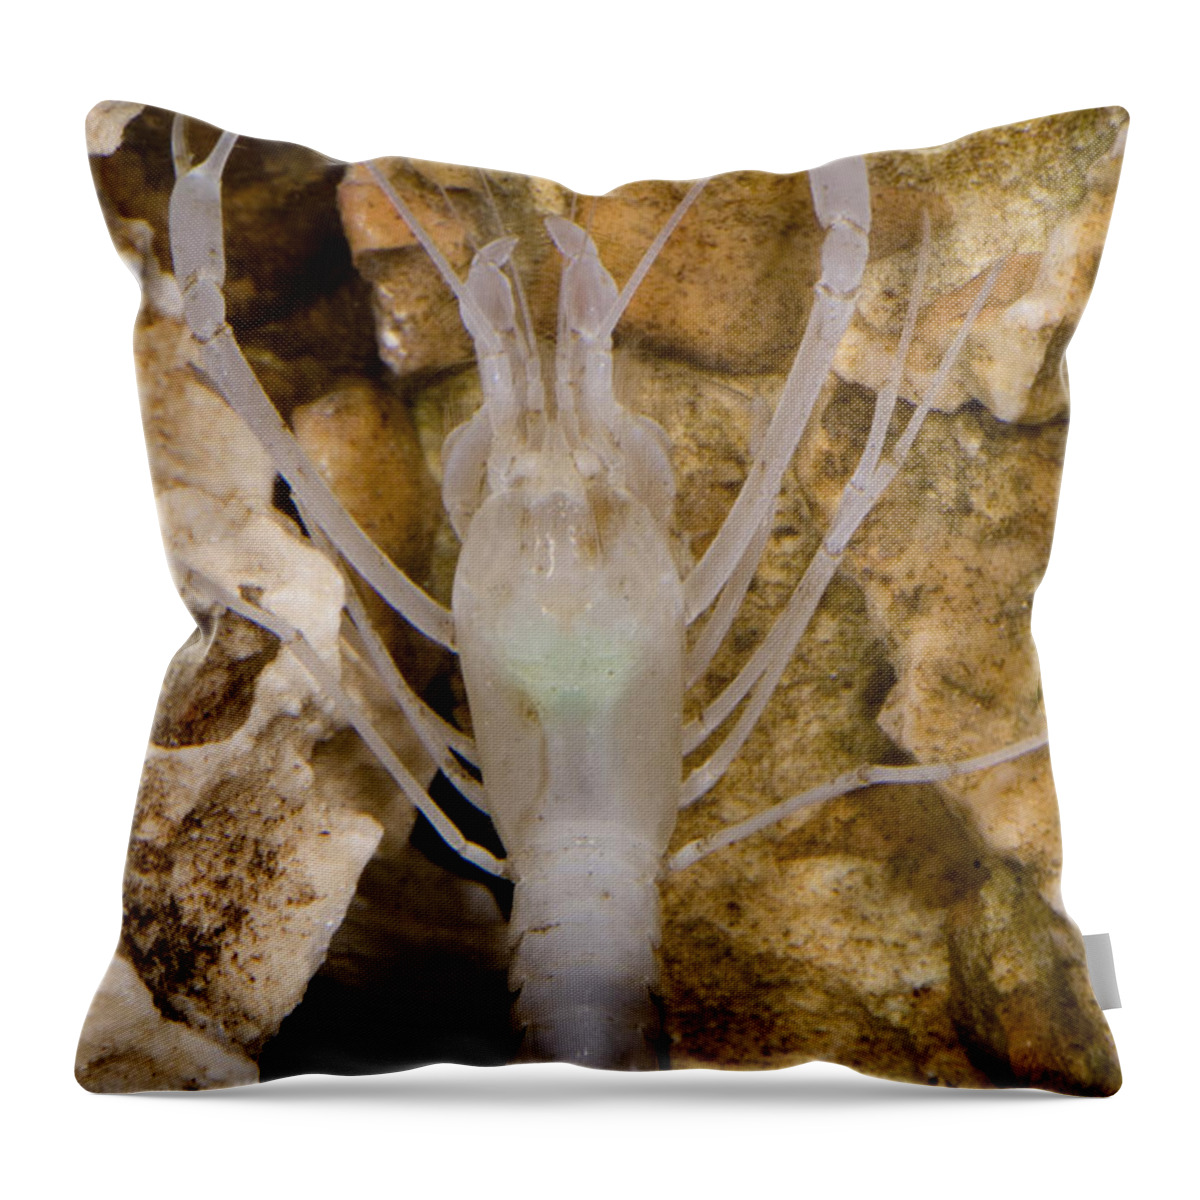 Stygobitic Throw Pillow featuring the photograph Mclanes Cave Crayfish #8 by Dante Fenolio